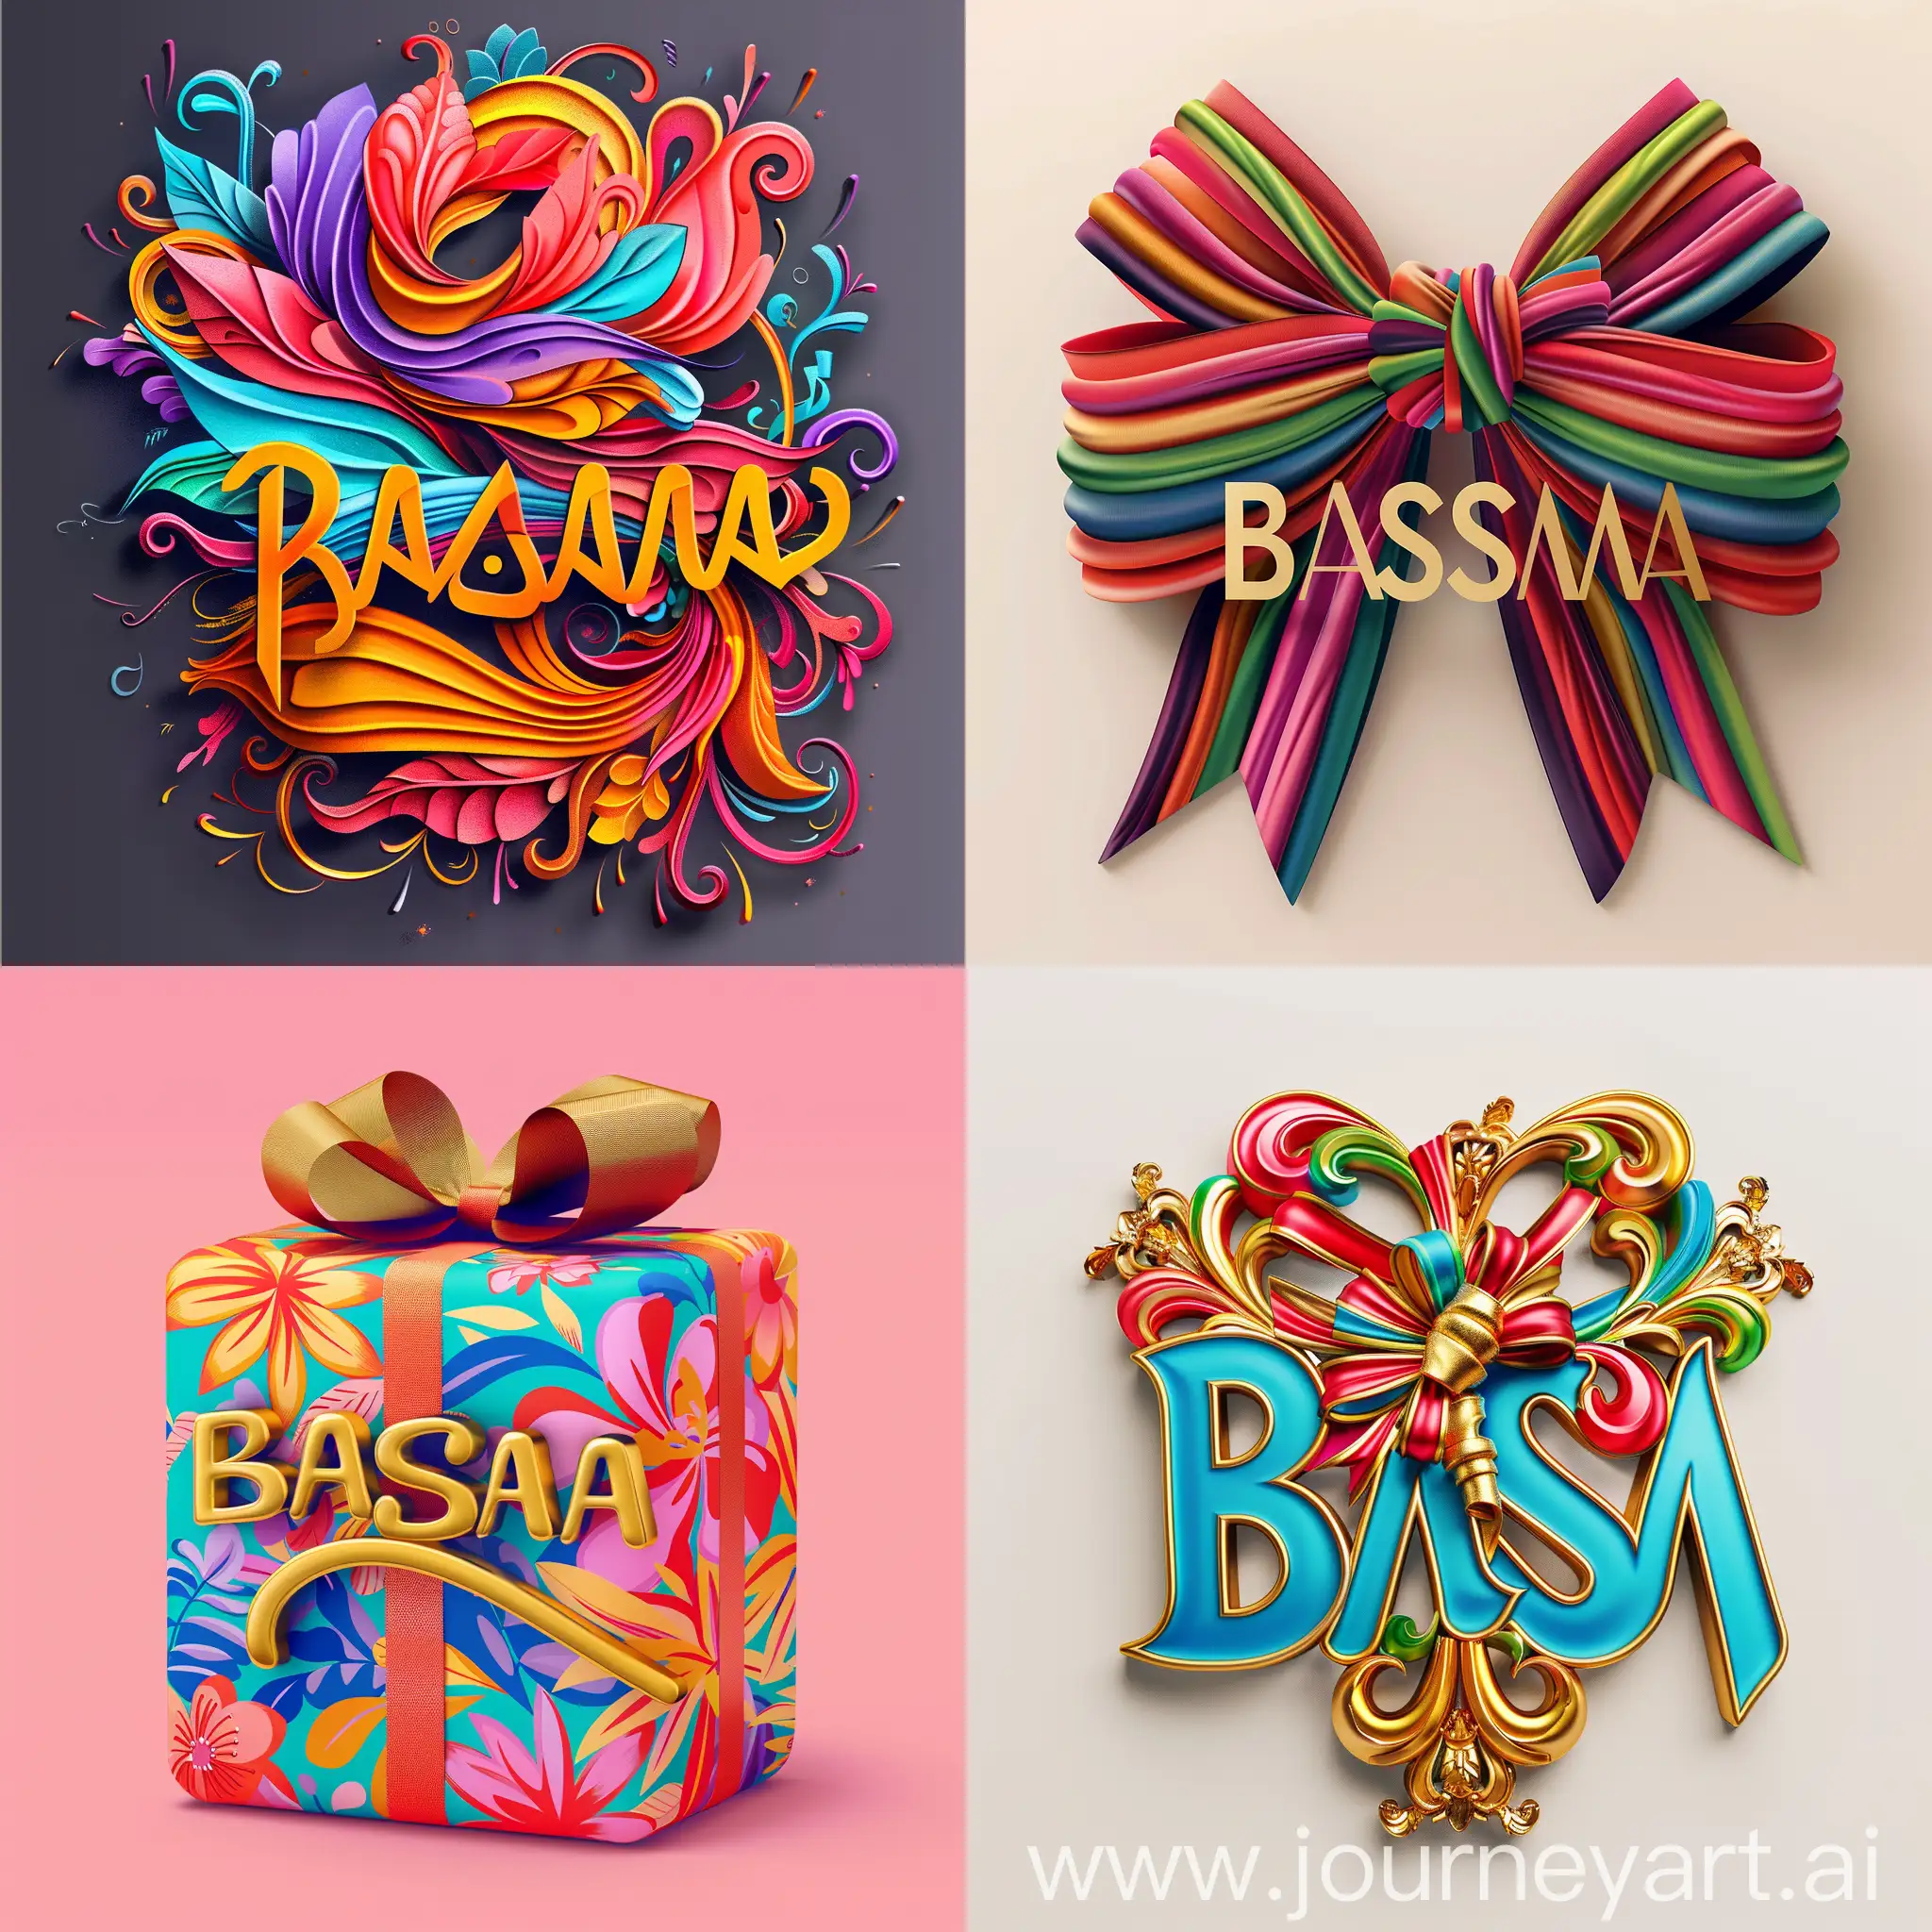 Fabulous-BASMA-Design-with-Vibrant-Colors-and-Elegant-Wrapping